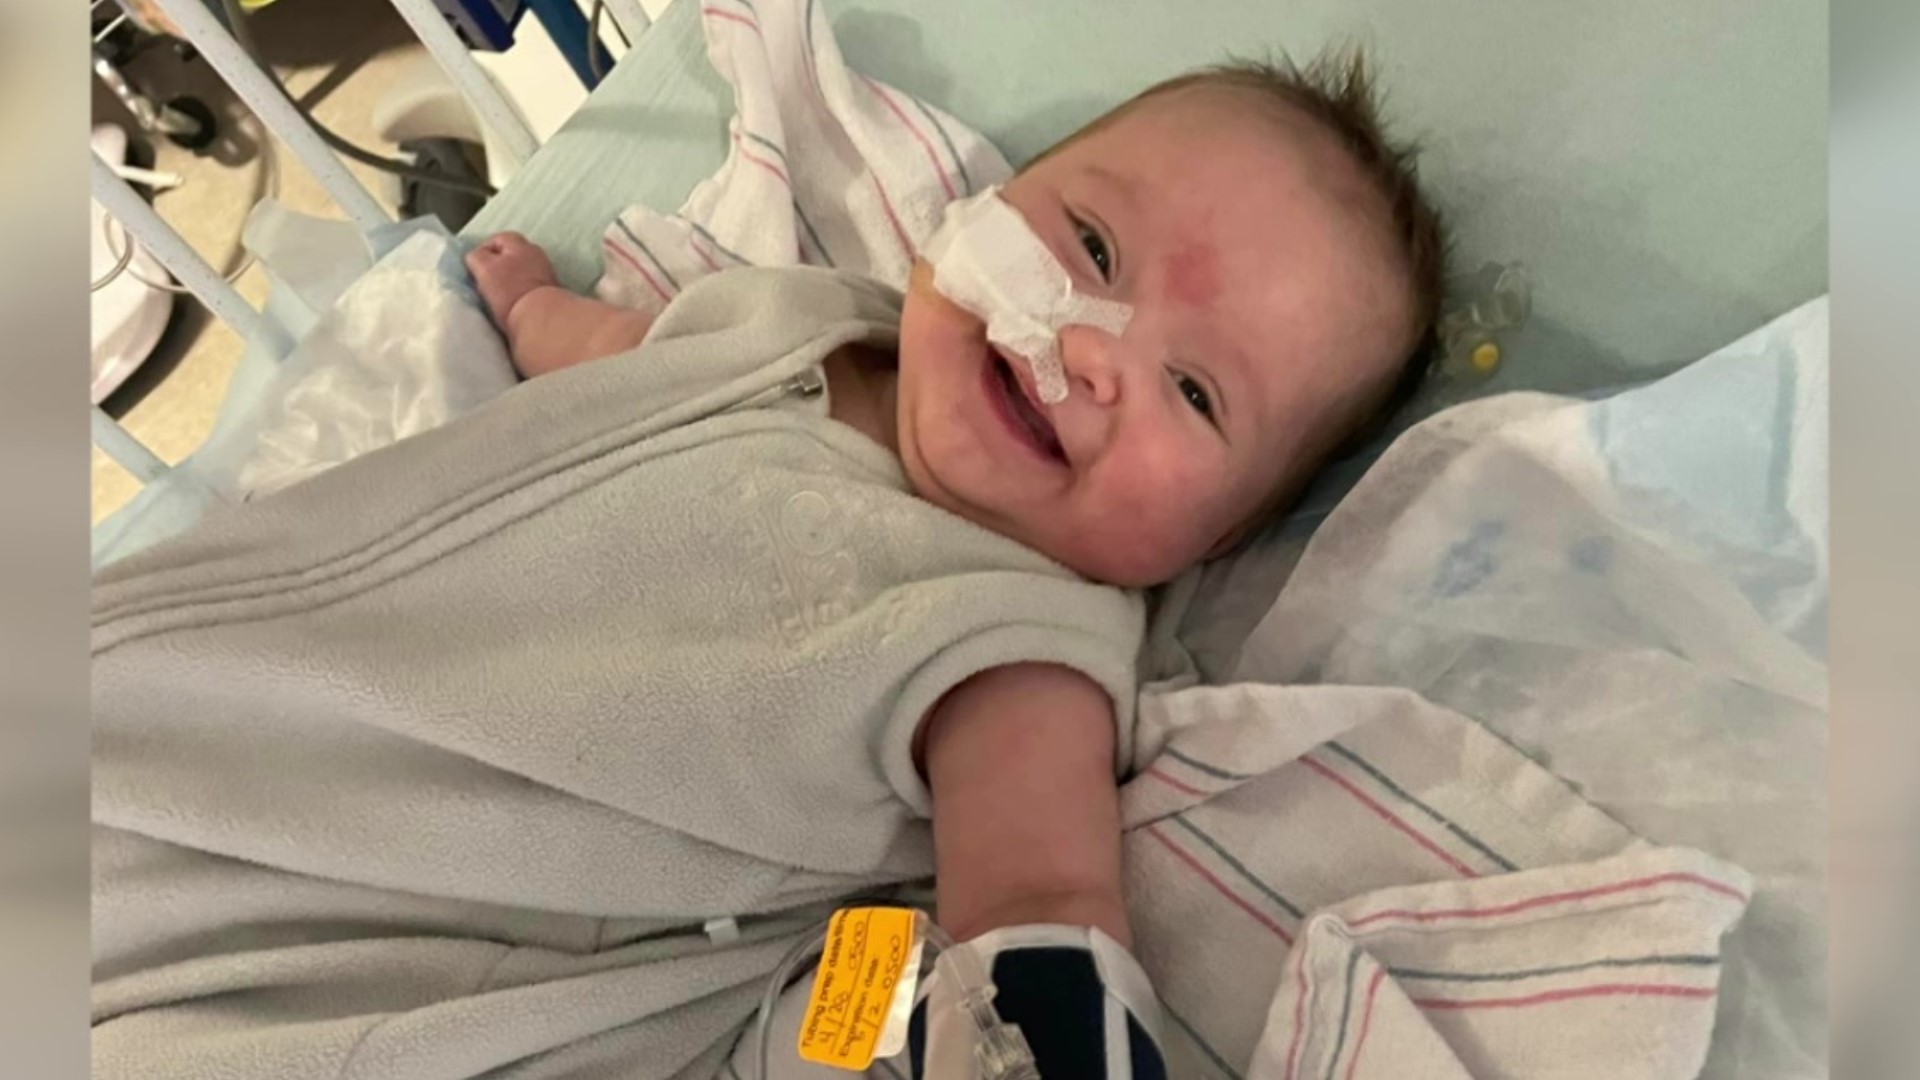 A Greentown man has made it his mission to raise money for organ donation awareness. For his annual fundraiser, he's helping a baby girl from his community.